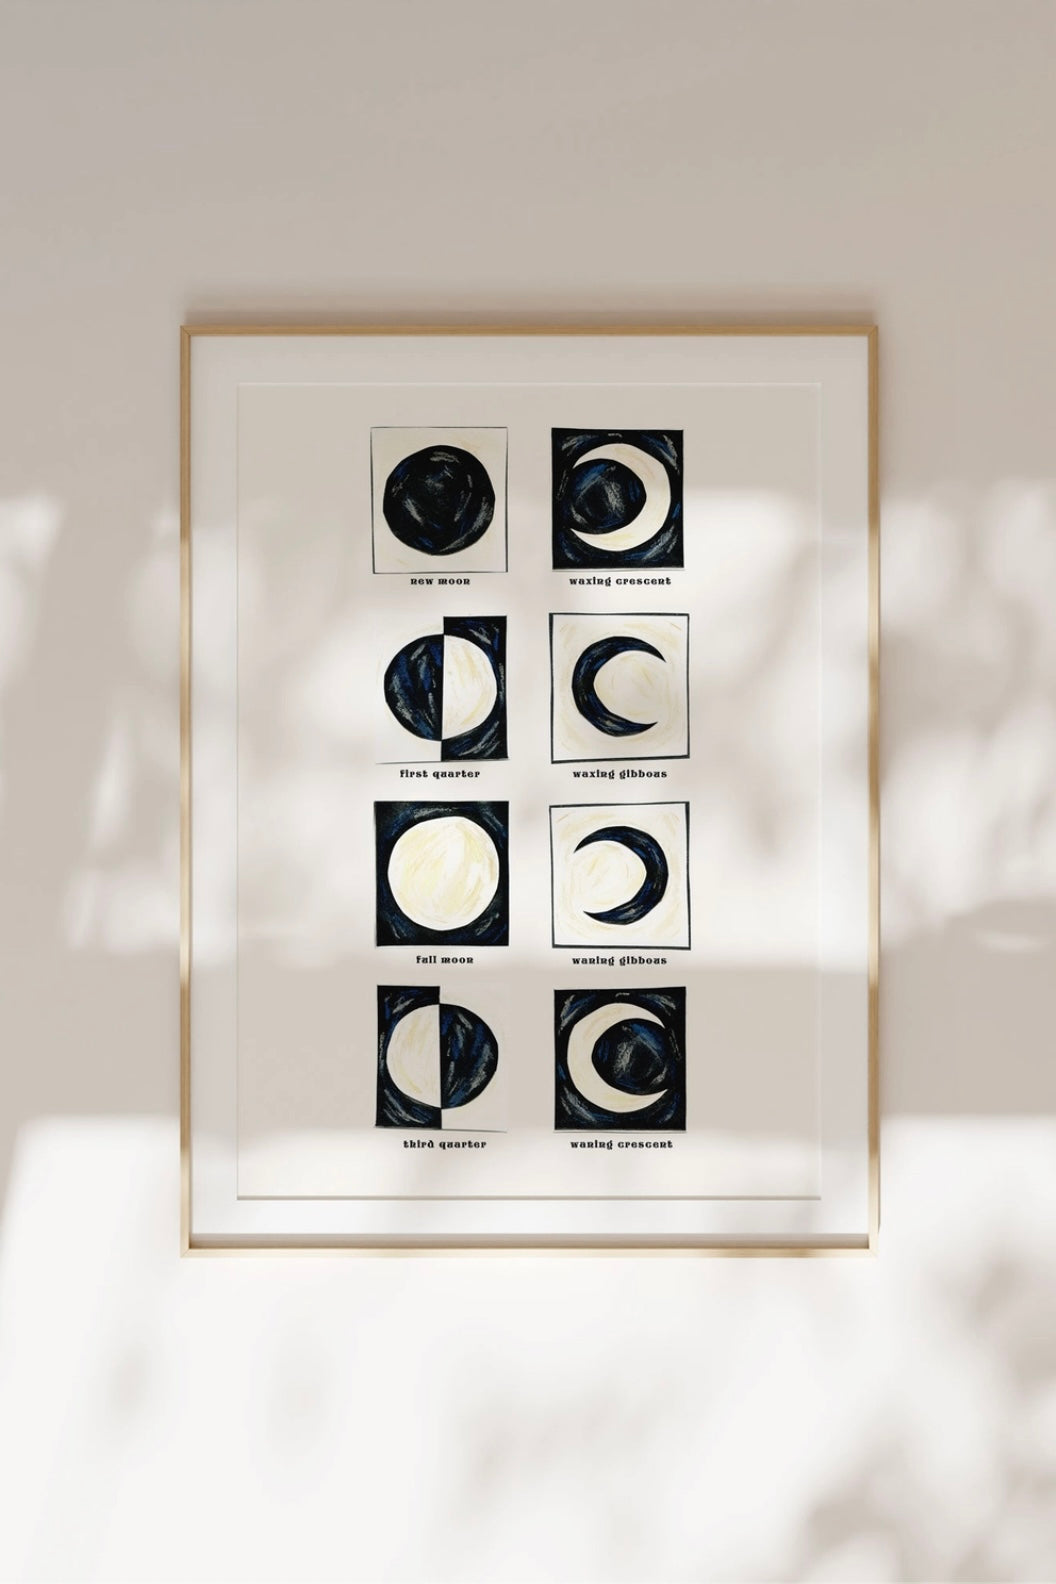 Moon Phases Art Print – Luna Collective